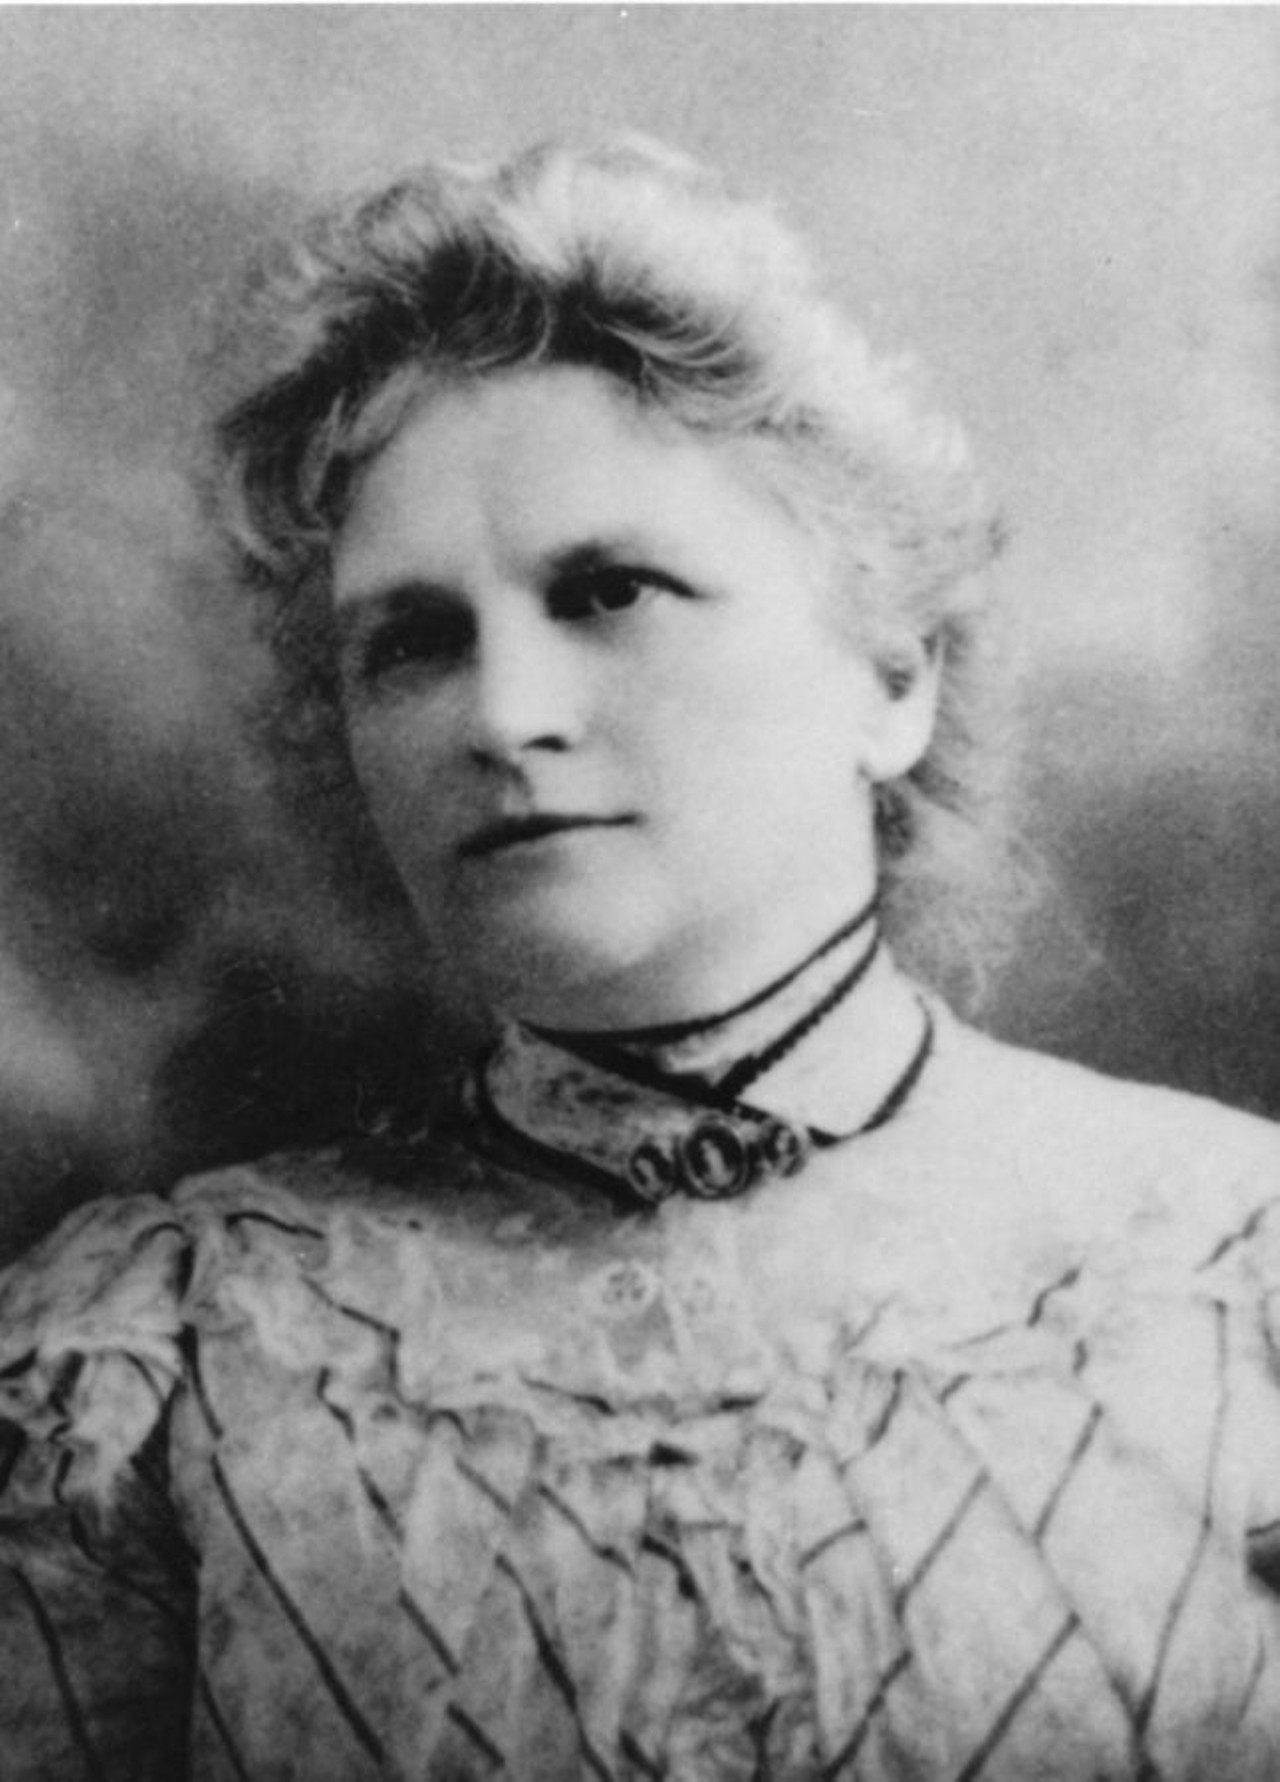 Kate Chopin
This author of The Awakening was born in St. Louis and is buried in Calvary Cemetery.
Photo credit: Wikimedia Commons